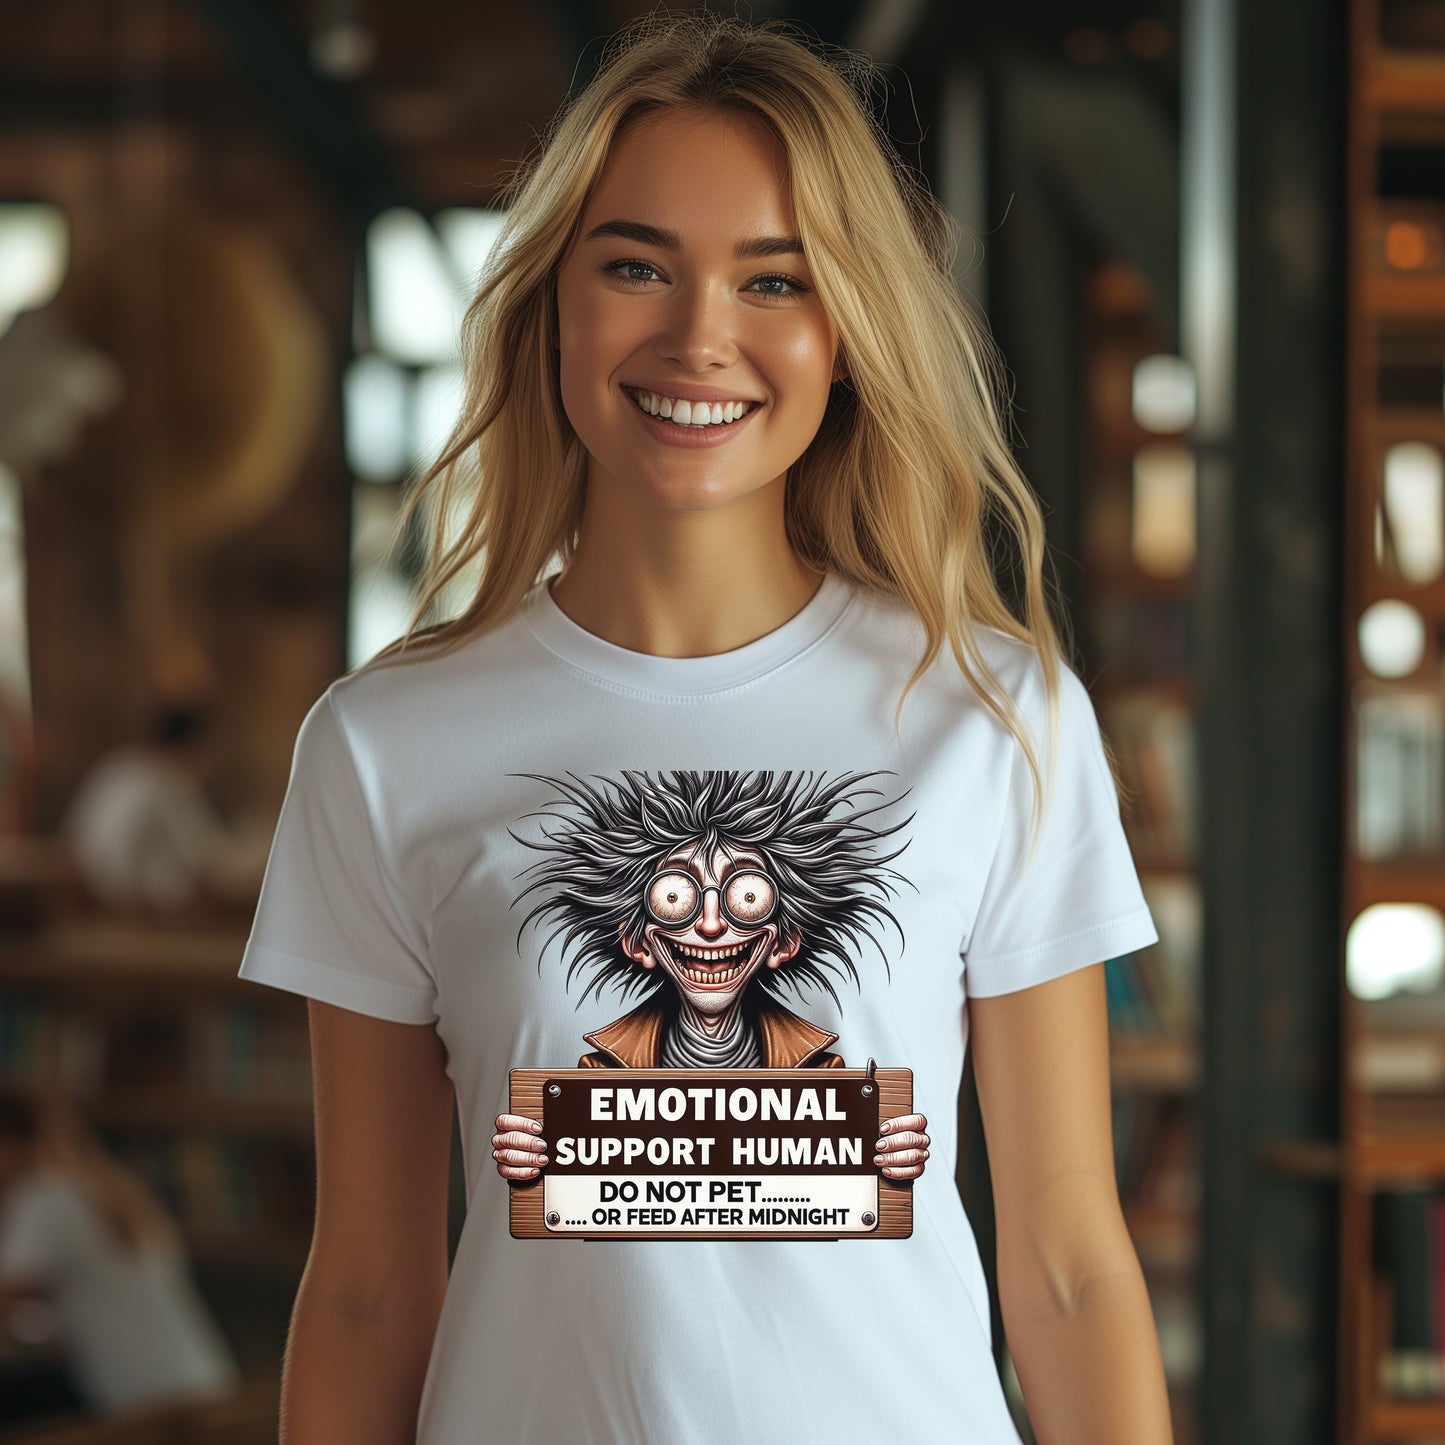 Emotional Support Human T-Shirt gift, Gift for Emotional Support Human, Funny Emotional Support Shirt T-Shirt, Funny Gift T-Shirt for Friend